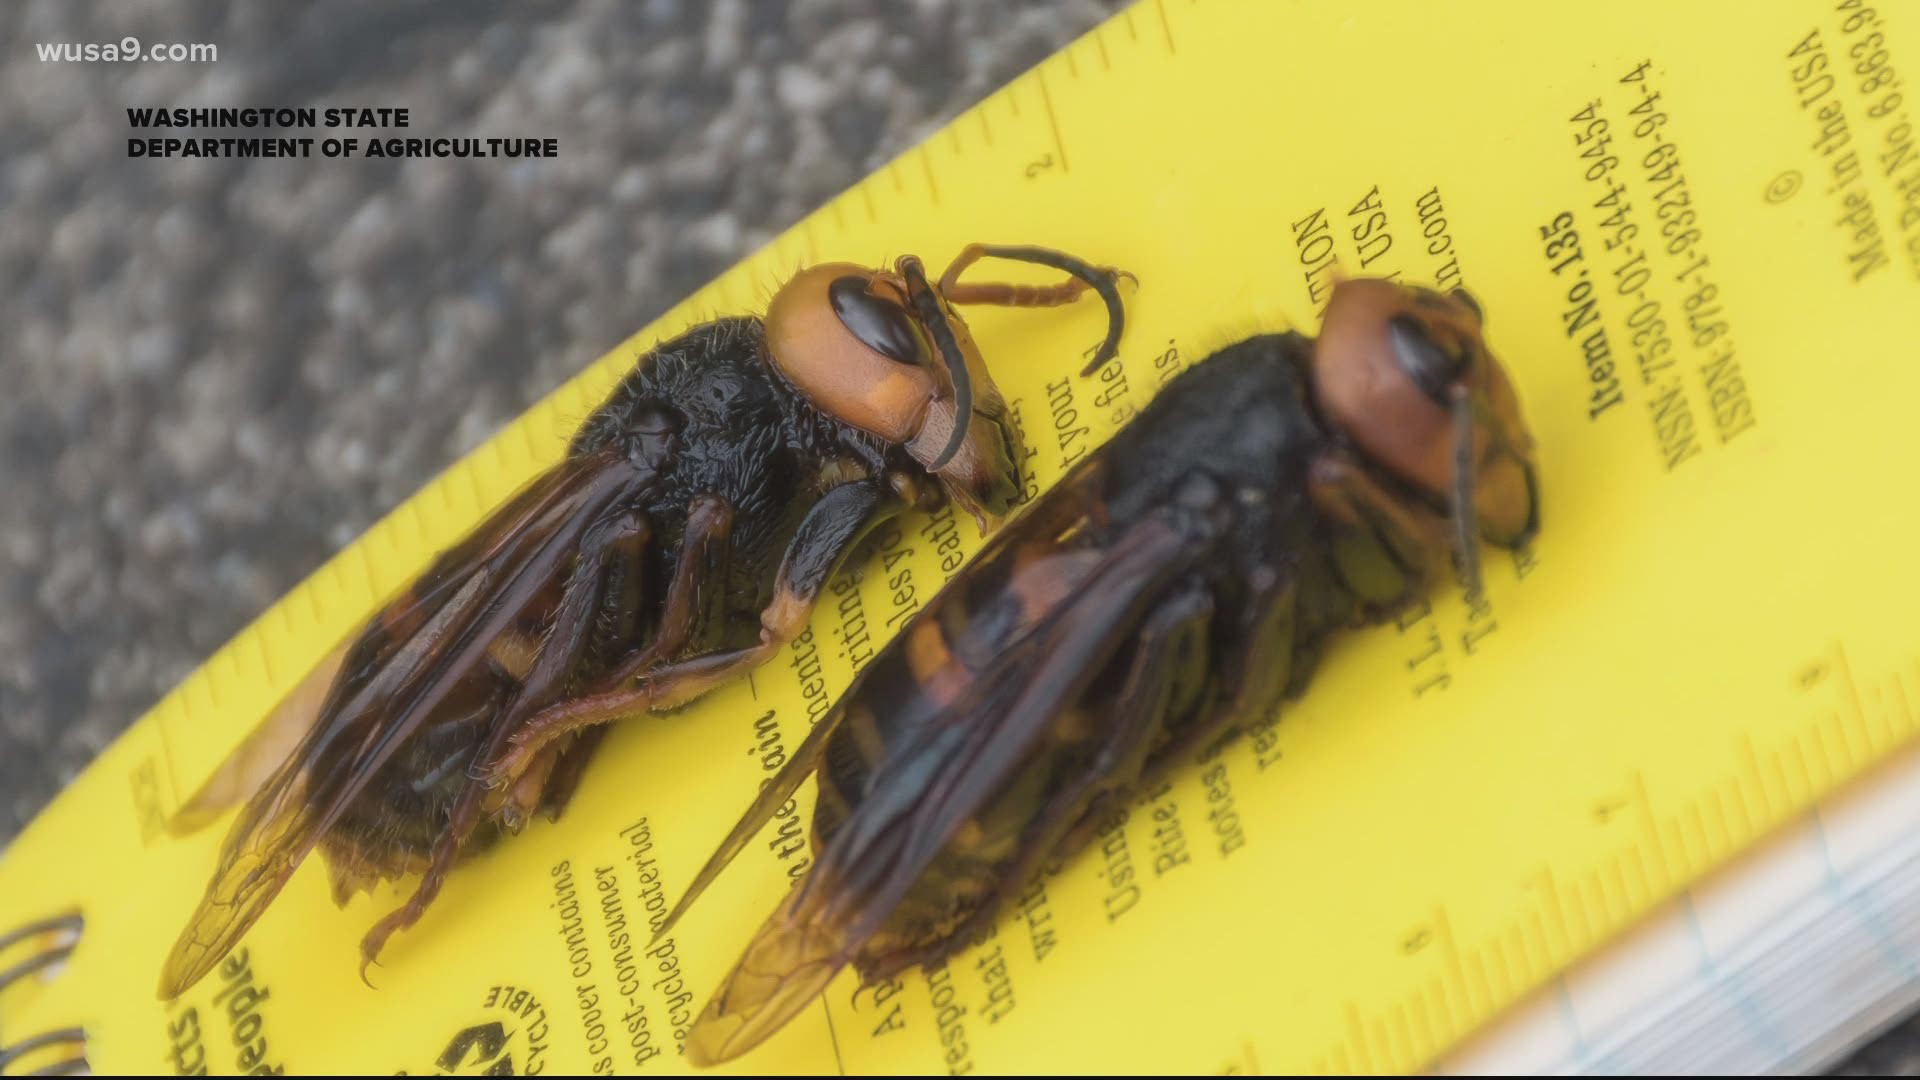 Asian giant hornets, now popularly referred to as 'murder hornets', have got social media buzzing.